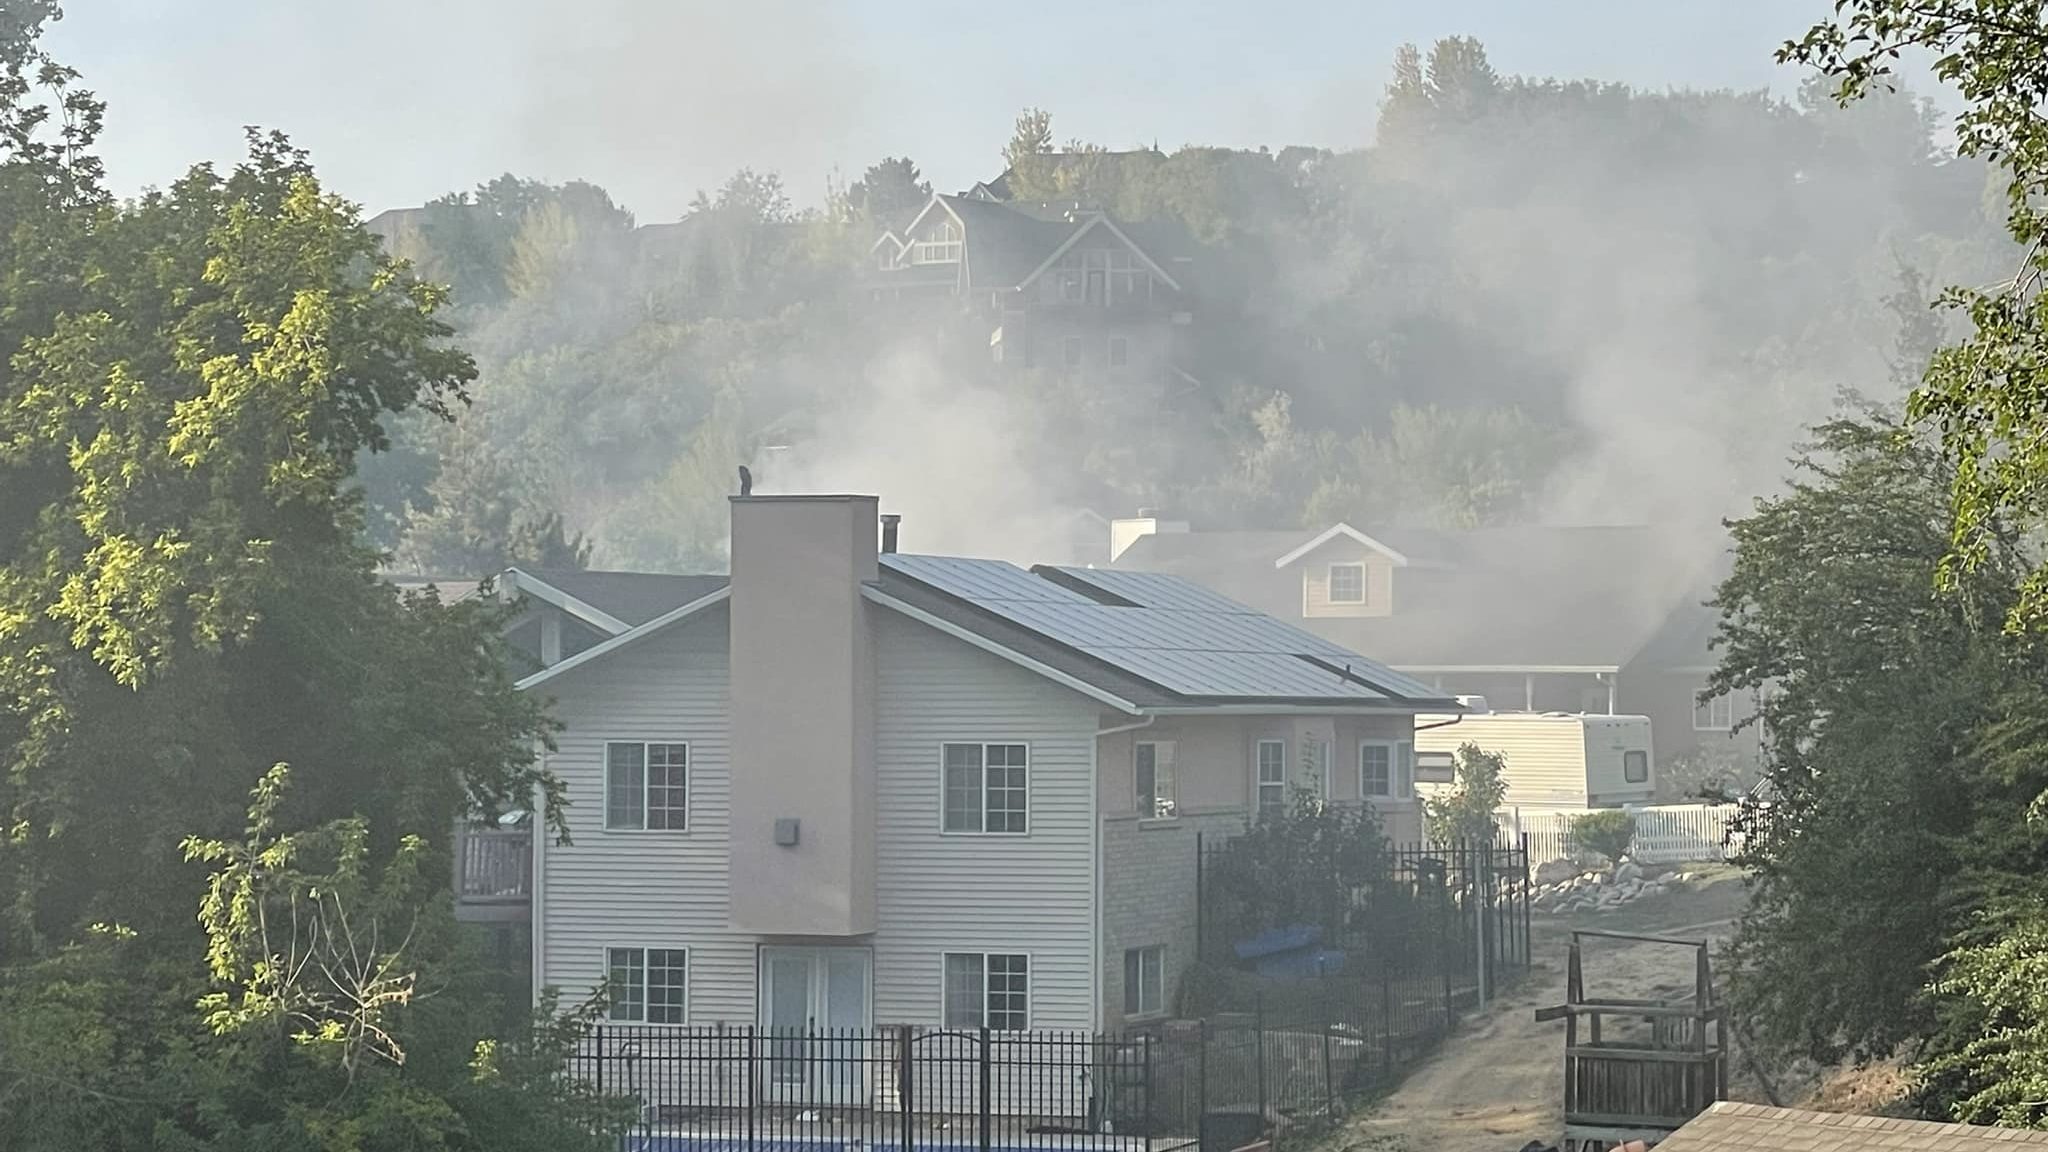 Emergency personnel in Layton responded to a structure fire Monday evening at 2107 Kays Creek Drive...